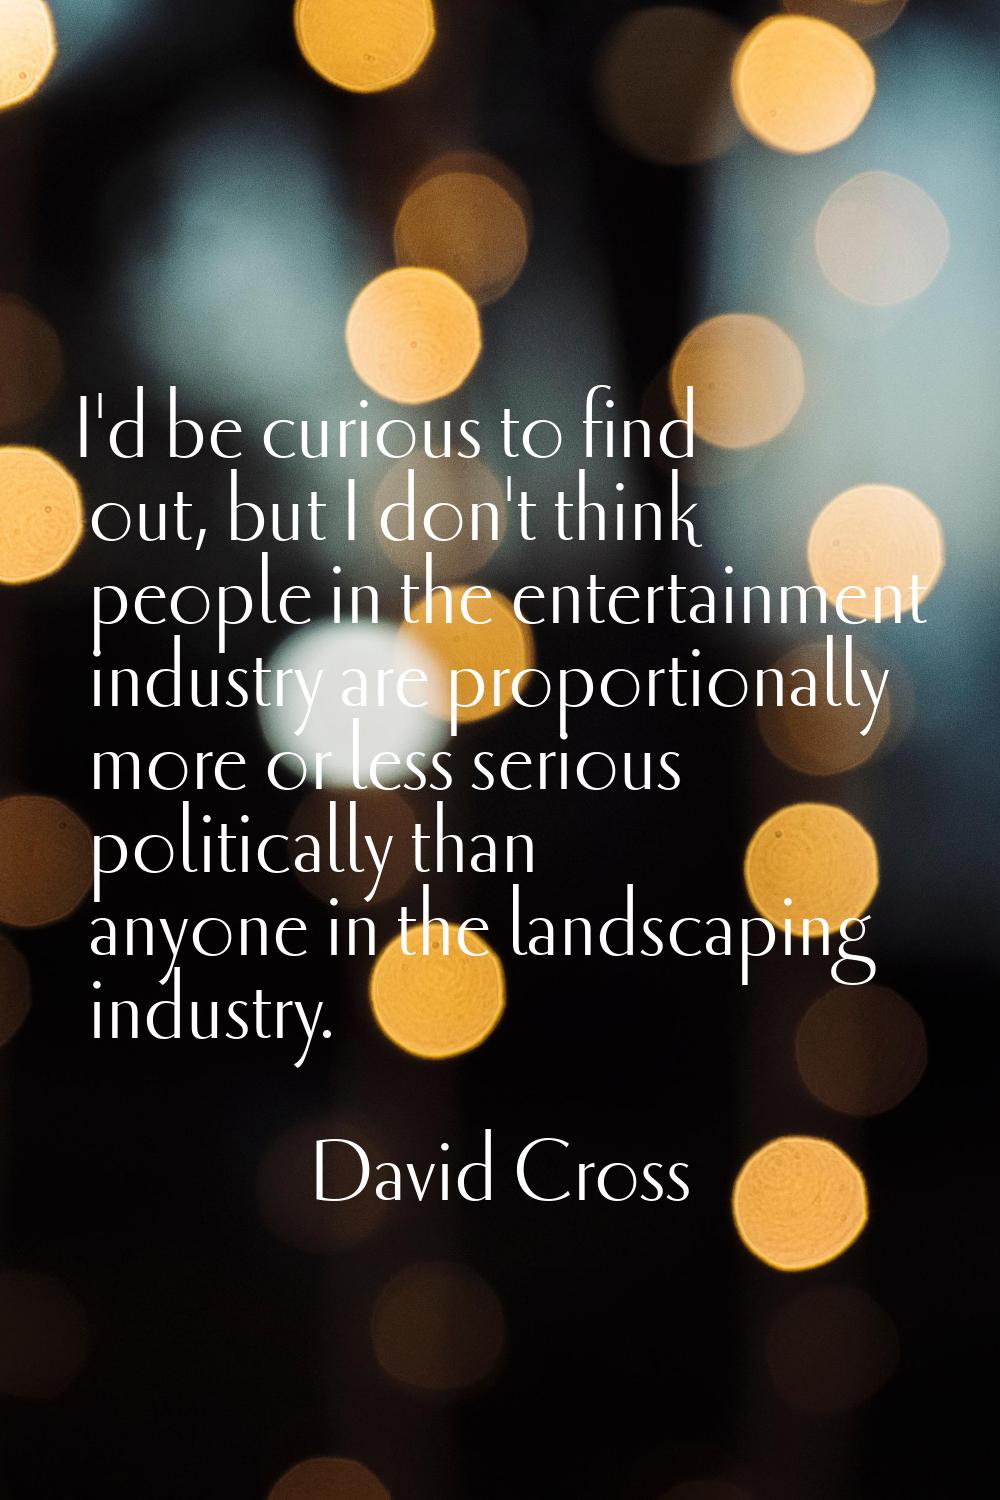 I'd be curious to find out, but I don't think people in the entertainment industry are proportional